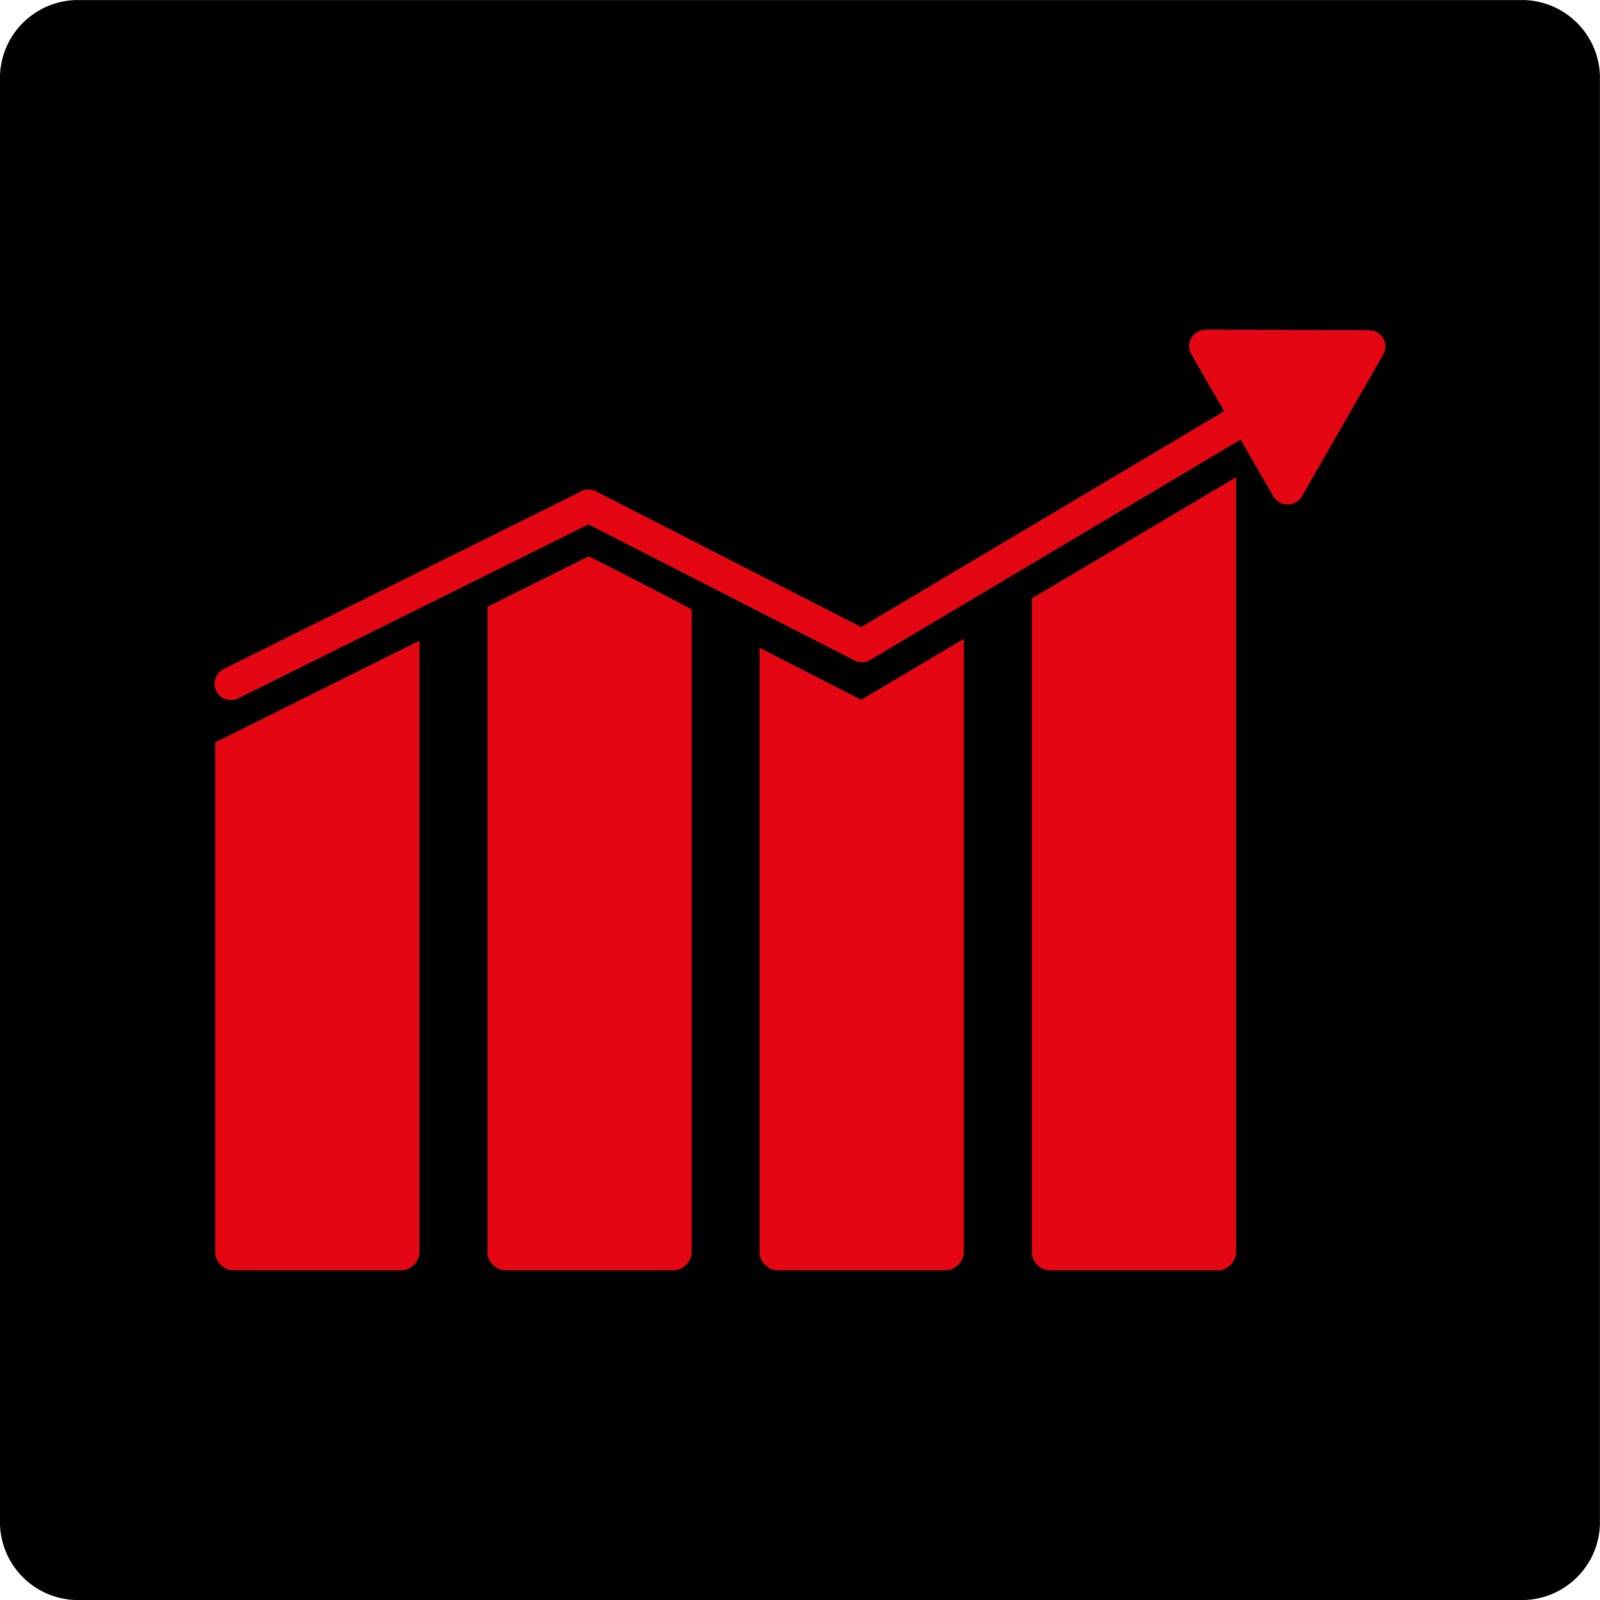 Trend vector icon. This flat rounded square button uses intensive red and black colors and isolated on a white background.